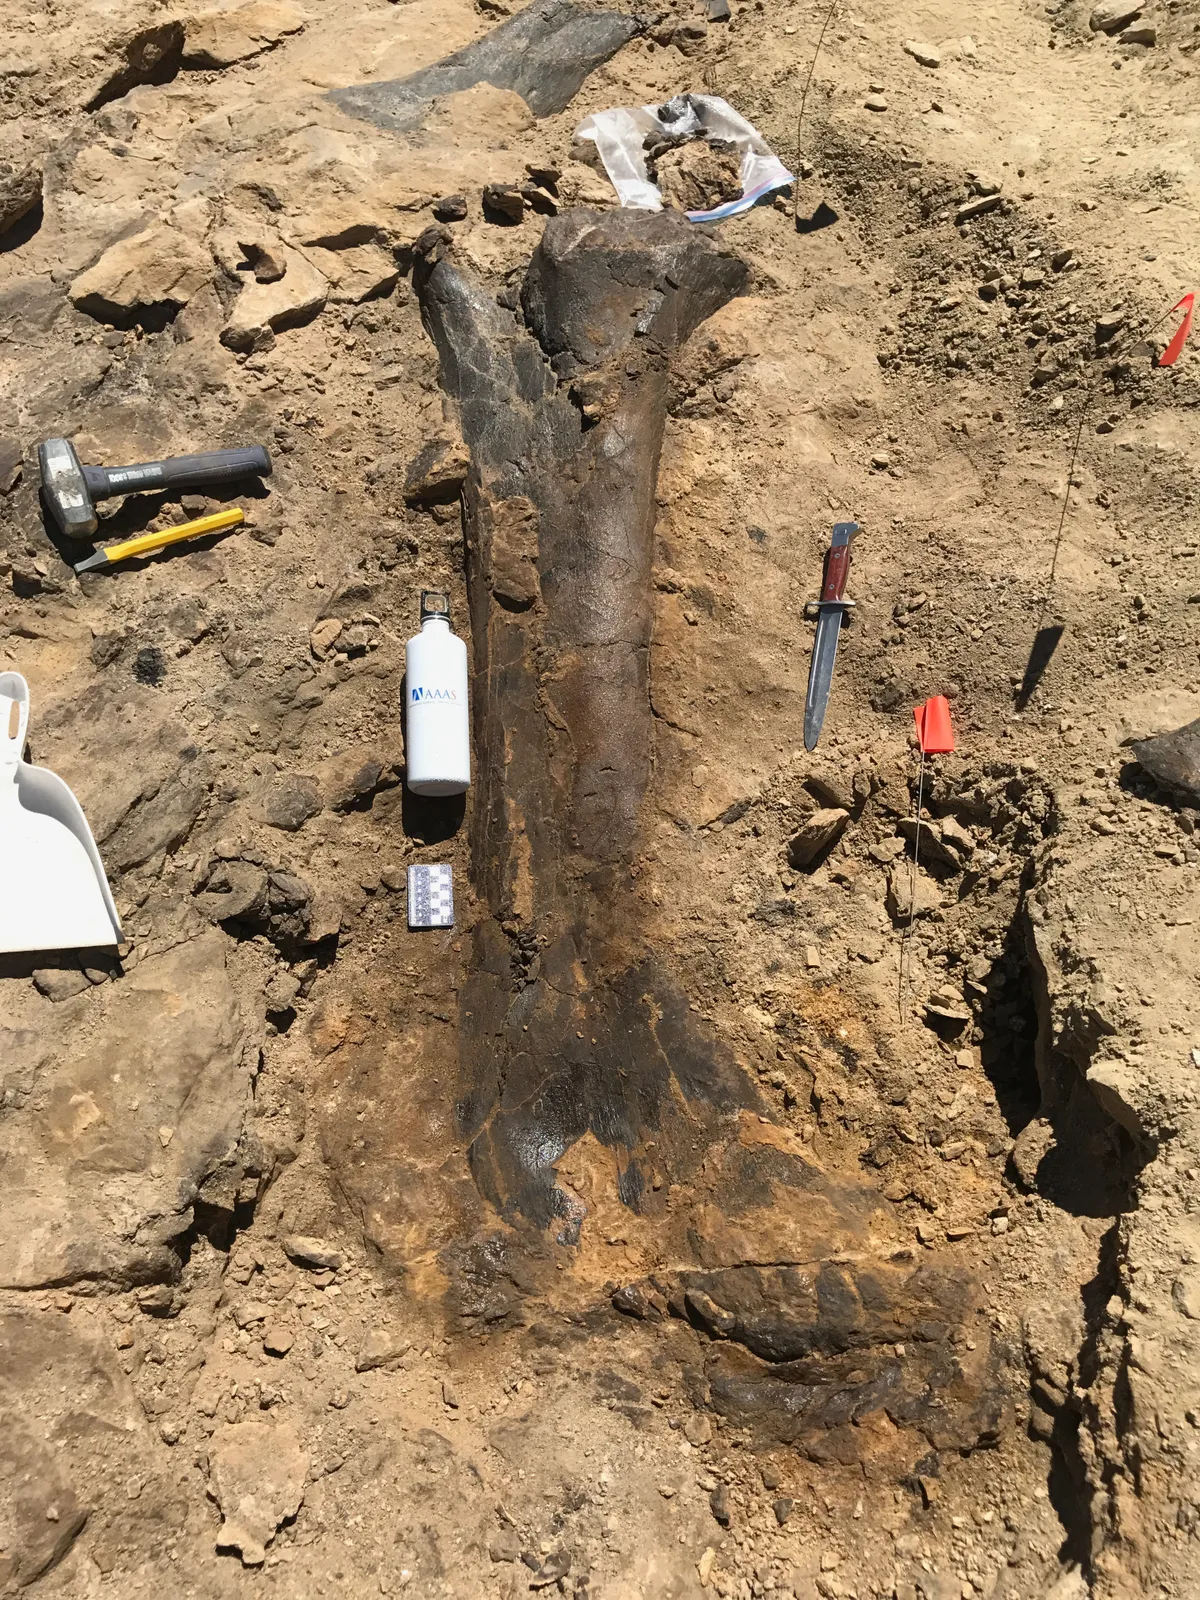 Sauropod femur at the upper sauropod quarry of The Jurassic Mile dig site